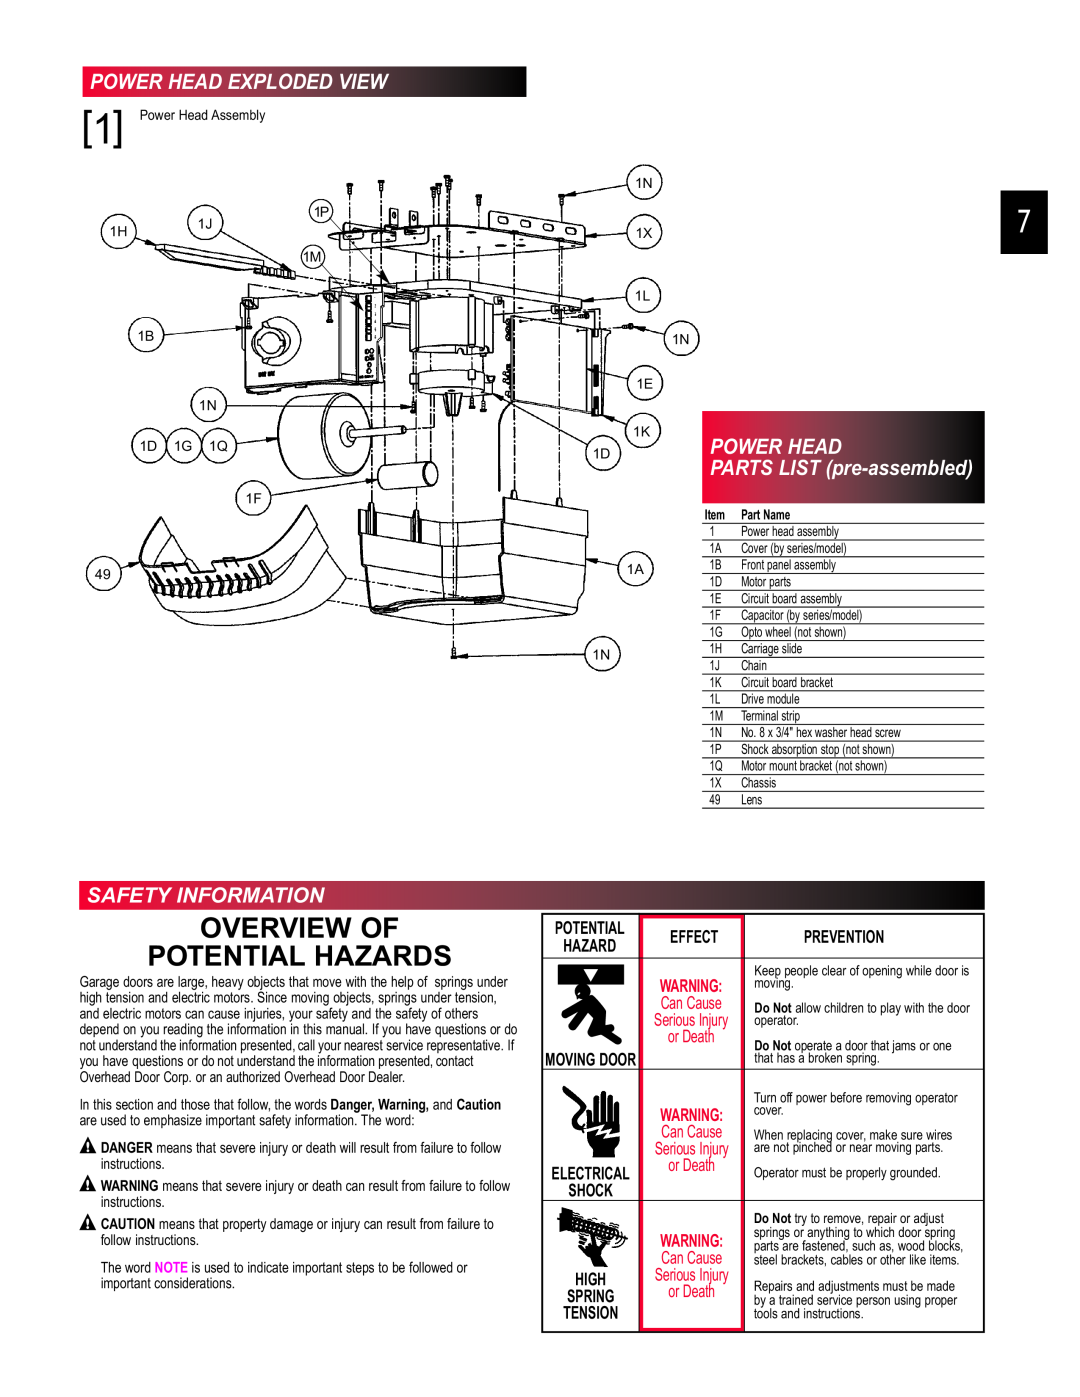 Chamberlain 3453135556 Power Head Exploded View, Safety Information, Overview Of Potential Hazards, Effect, Prevention 